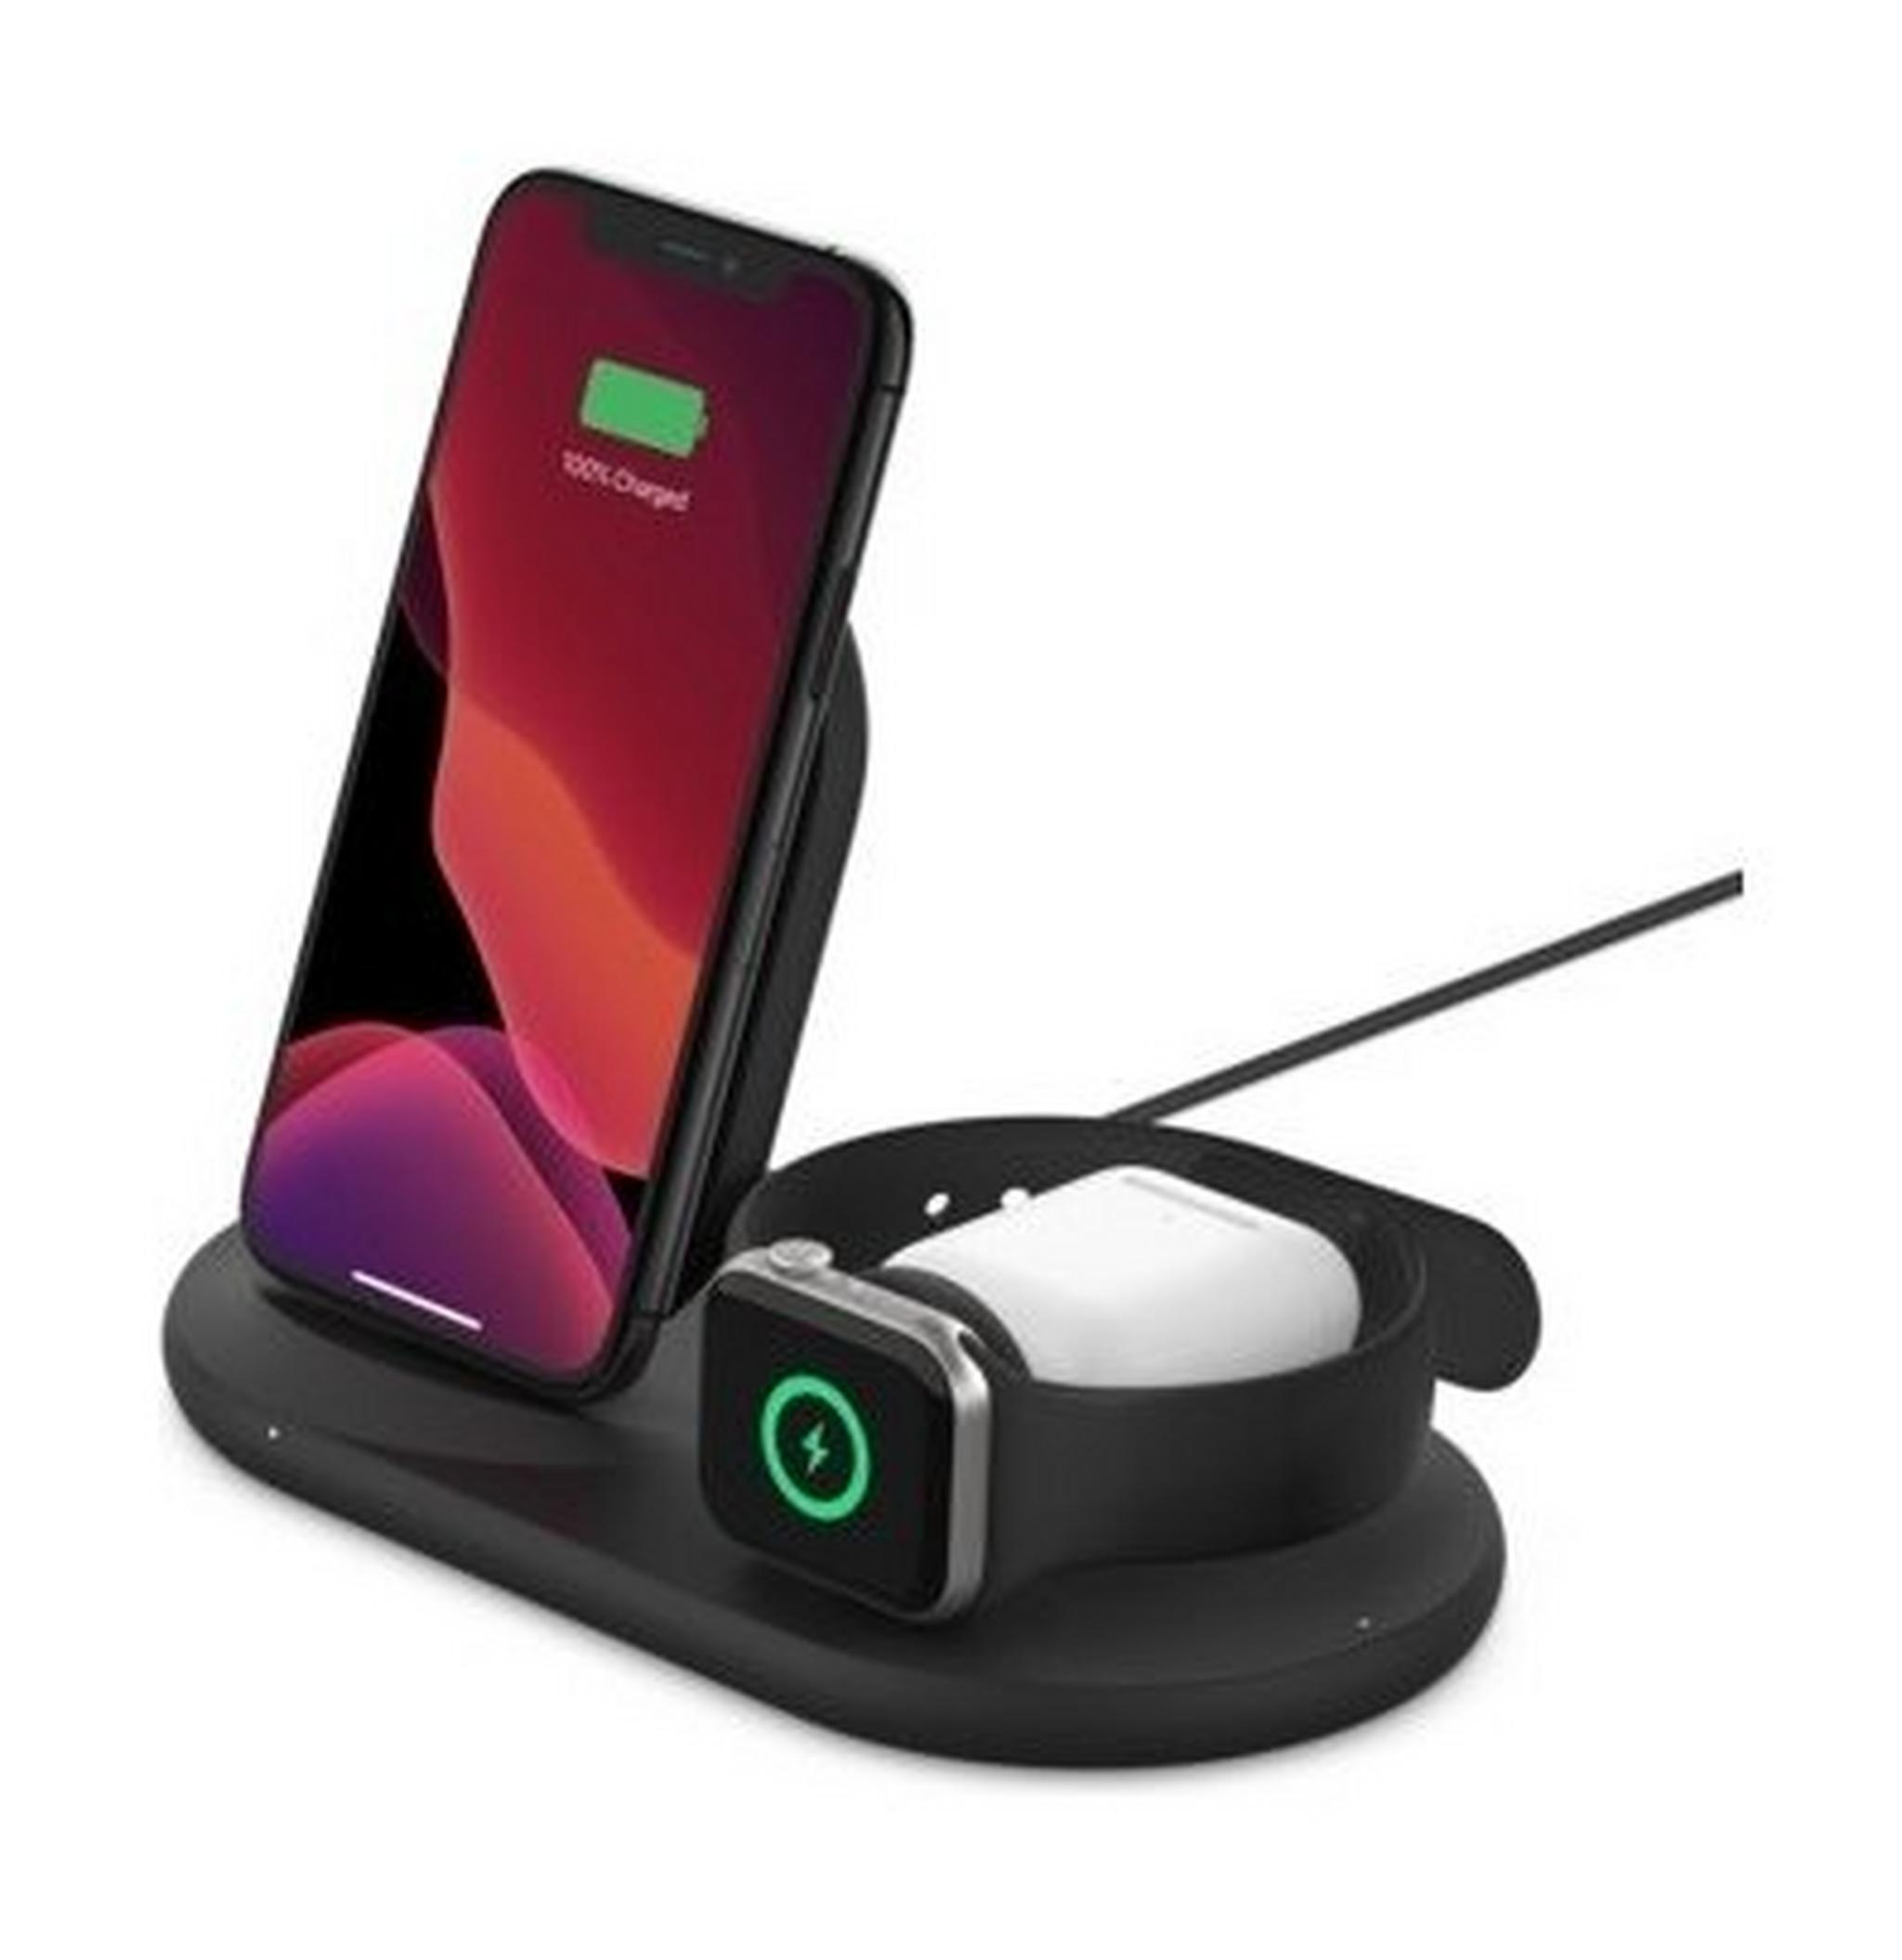 Belkin Boost Charge 3-in-1 Wireless Charger for Apple Devices - Black